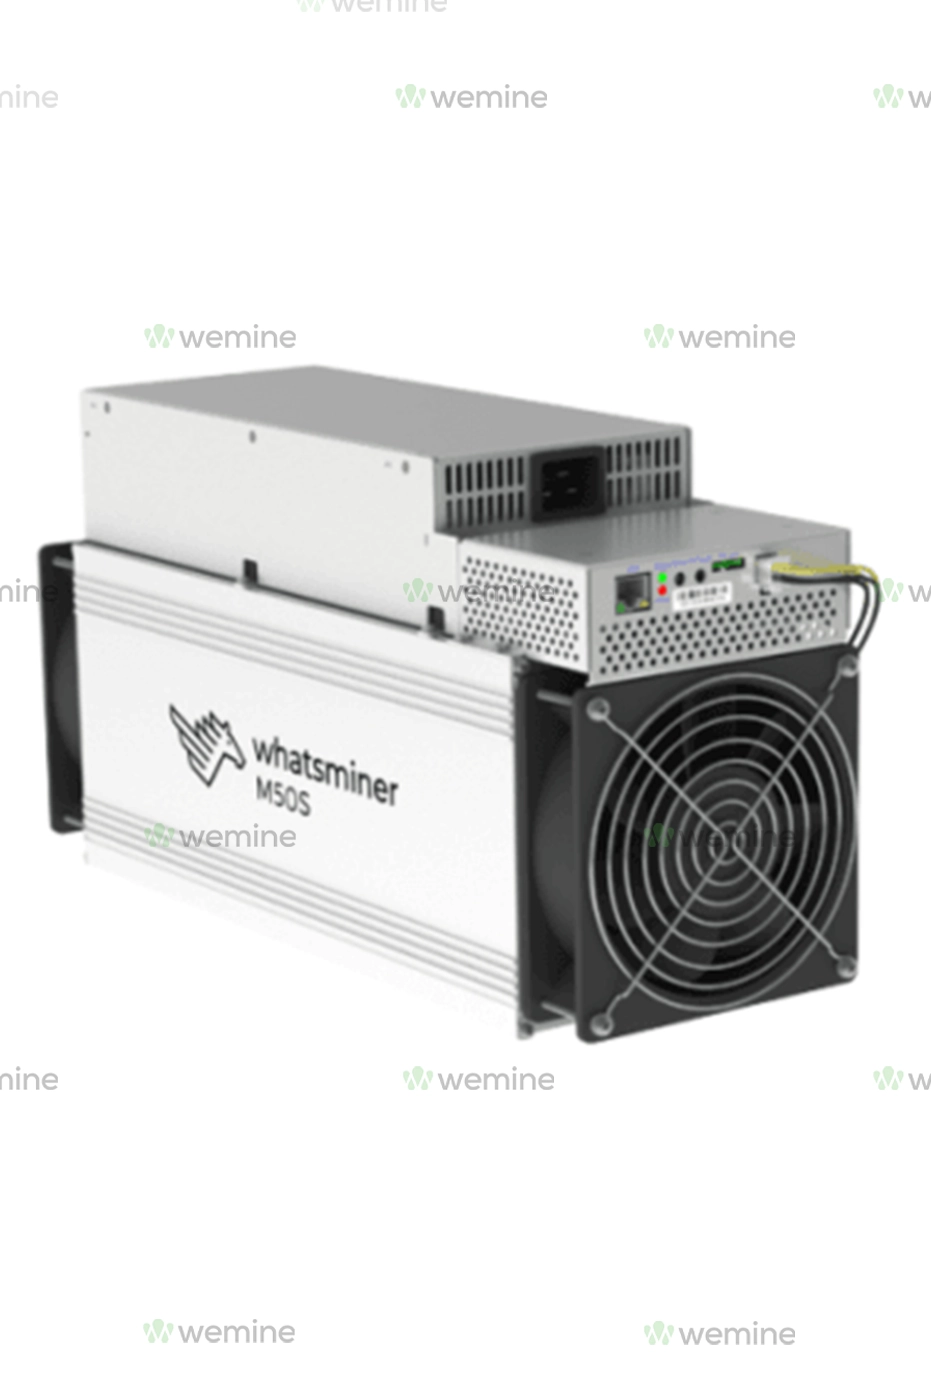 A two-component cryptocurrency miner with a white metal casing labeled 'Whatsminer M50S' alongside its power supply unit, featuring a large black cooling fan and multiple air vents for thermal management